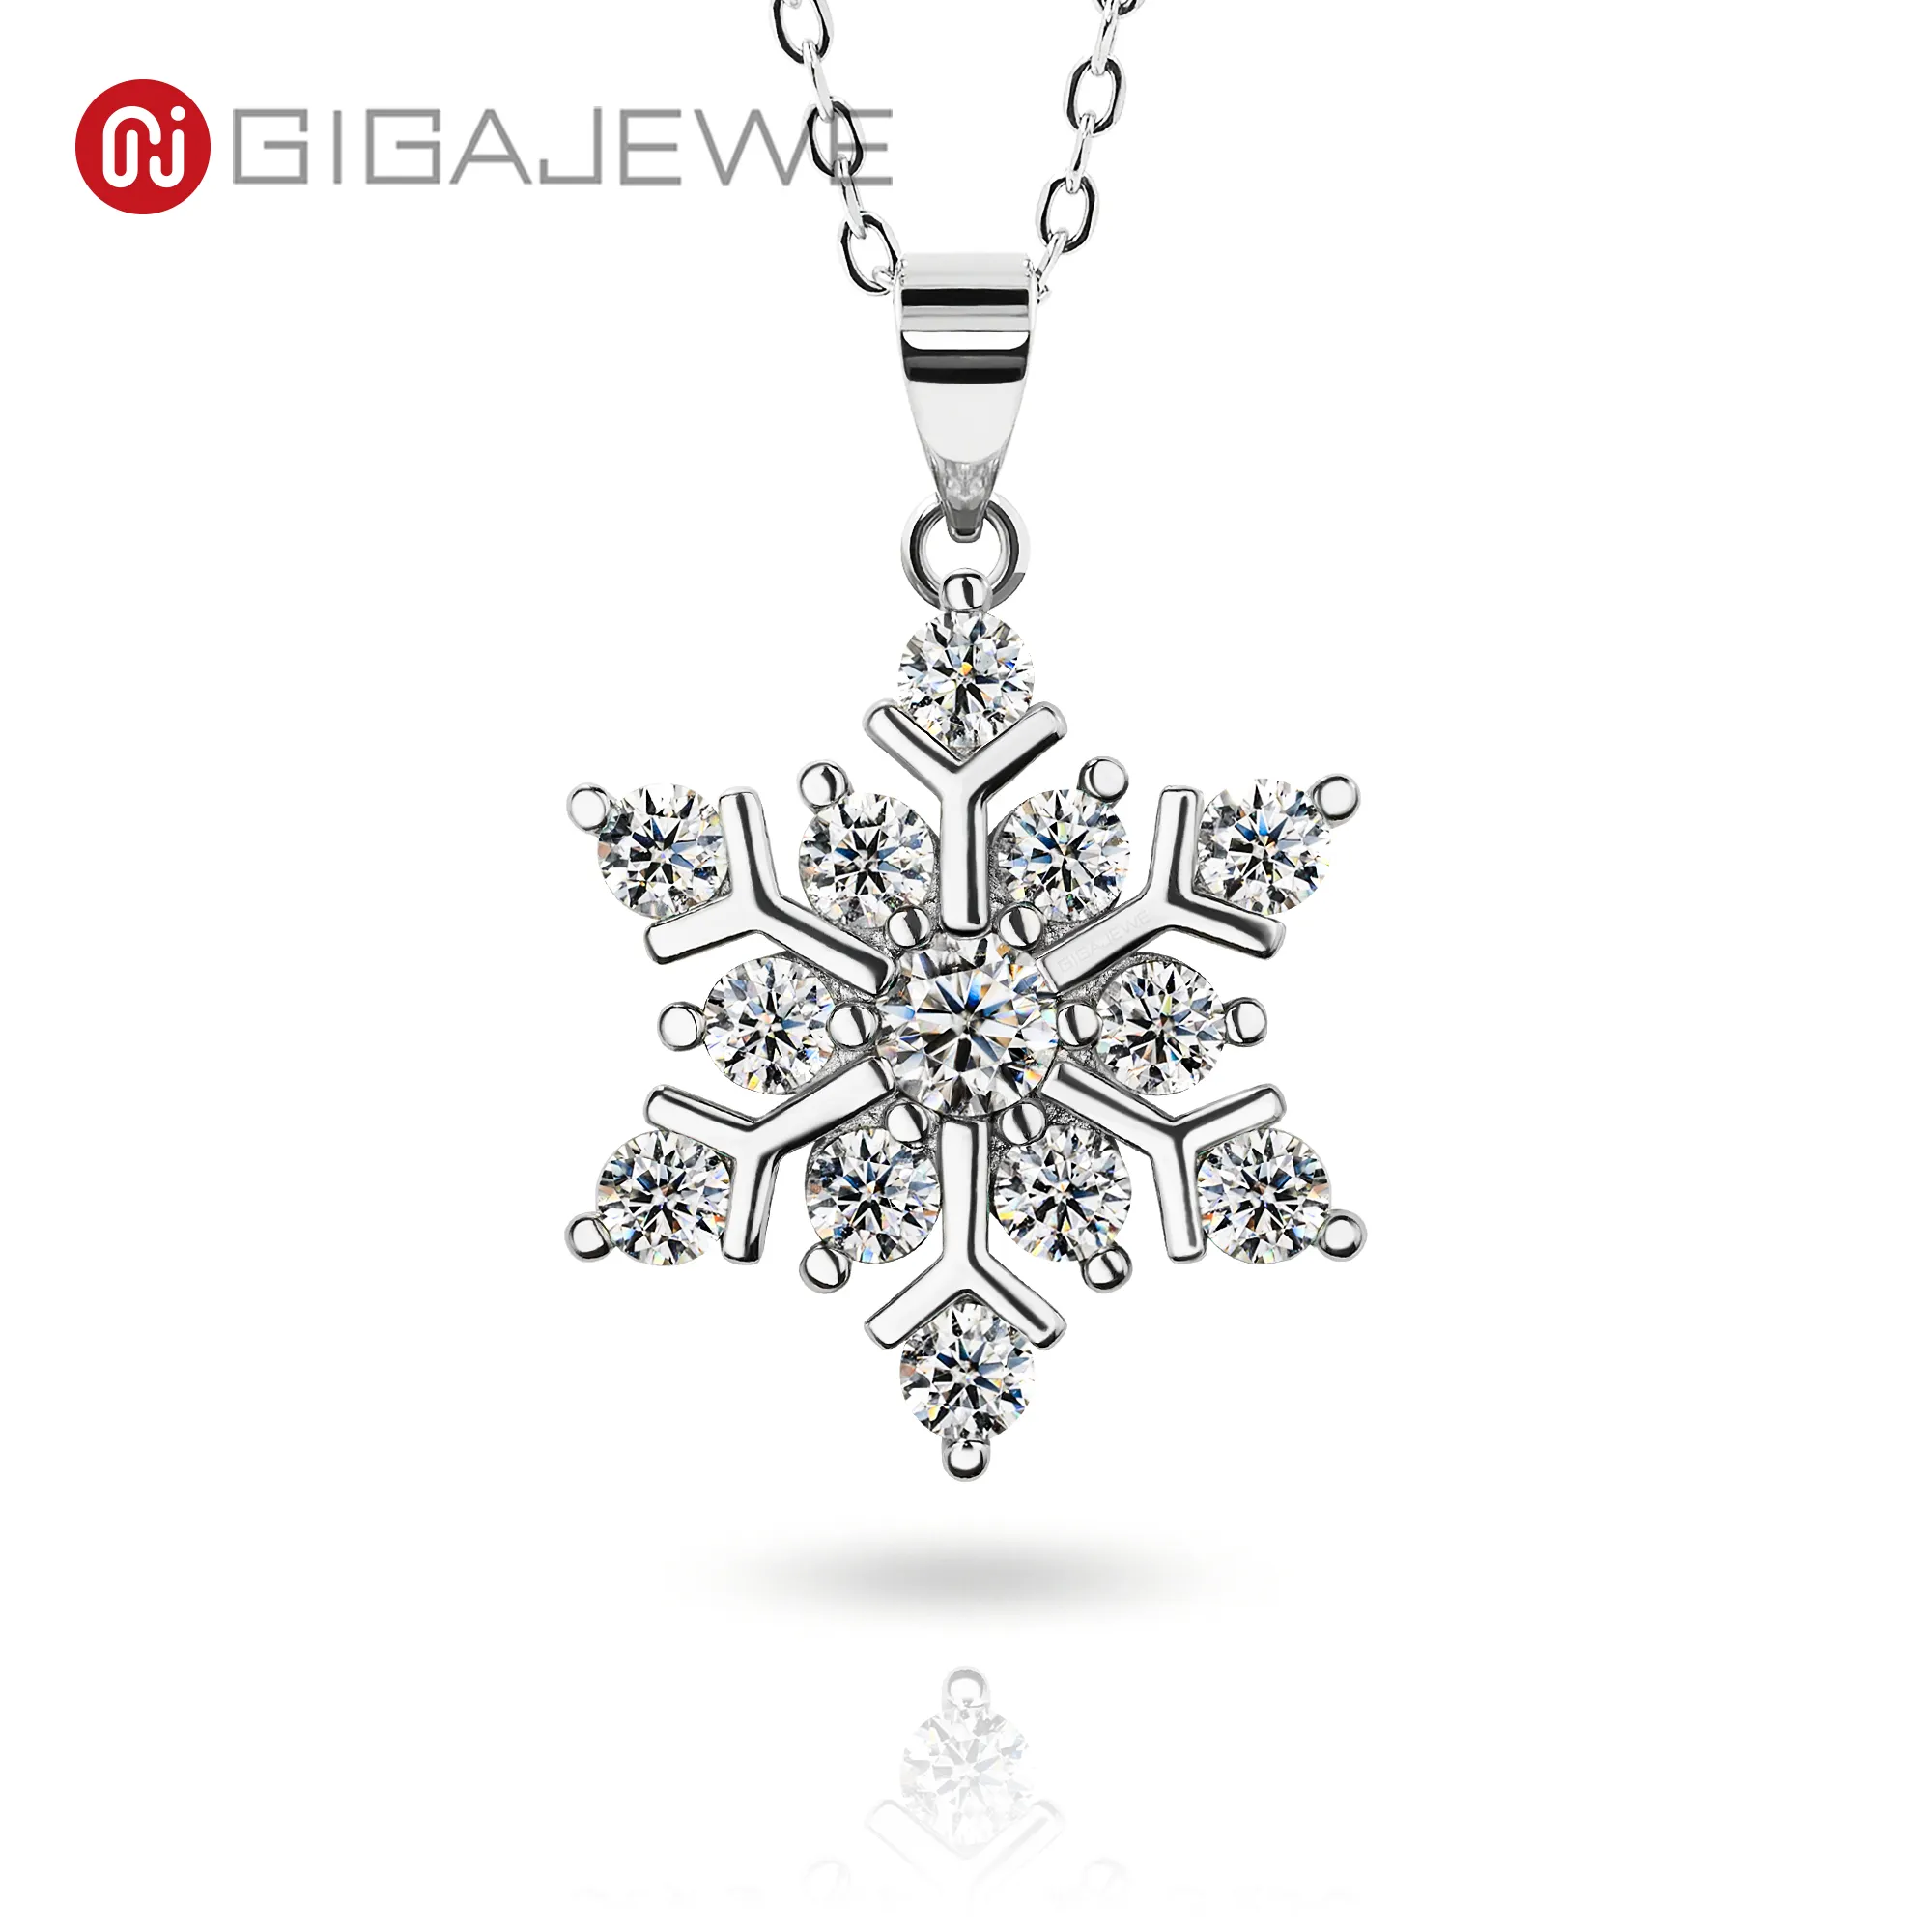 GIGAJEWE white green blue color snowflake 925 silver pendant 18k white gold plated necklace for Christmas gift